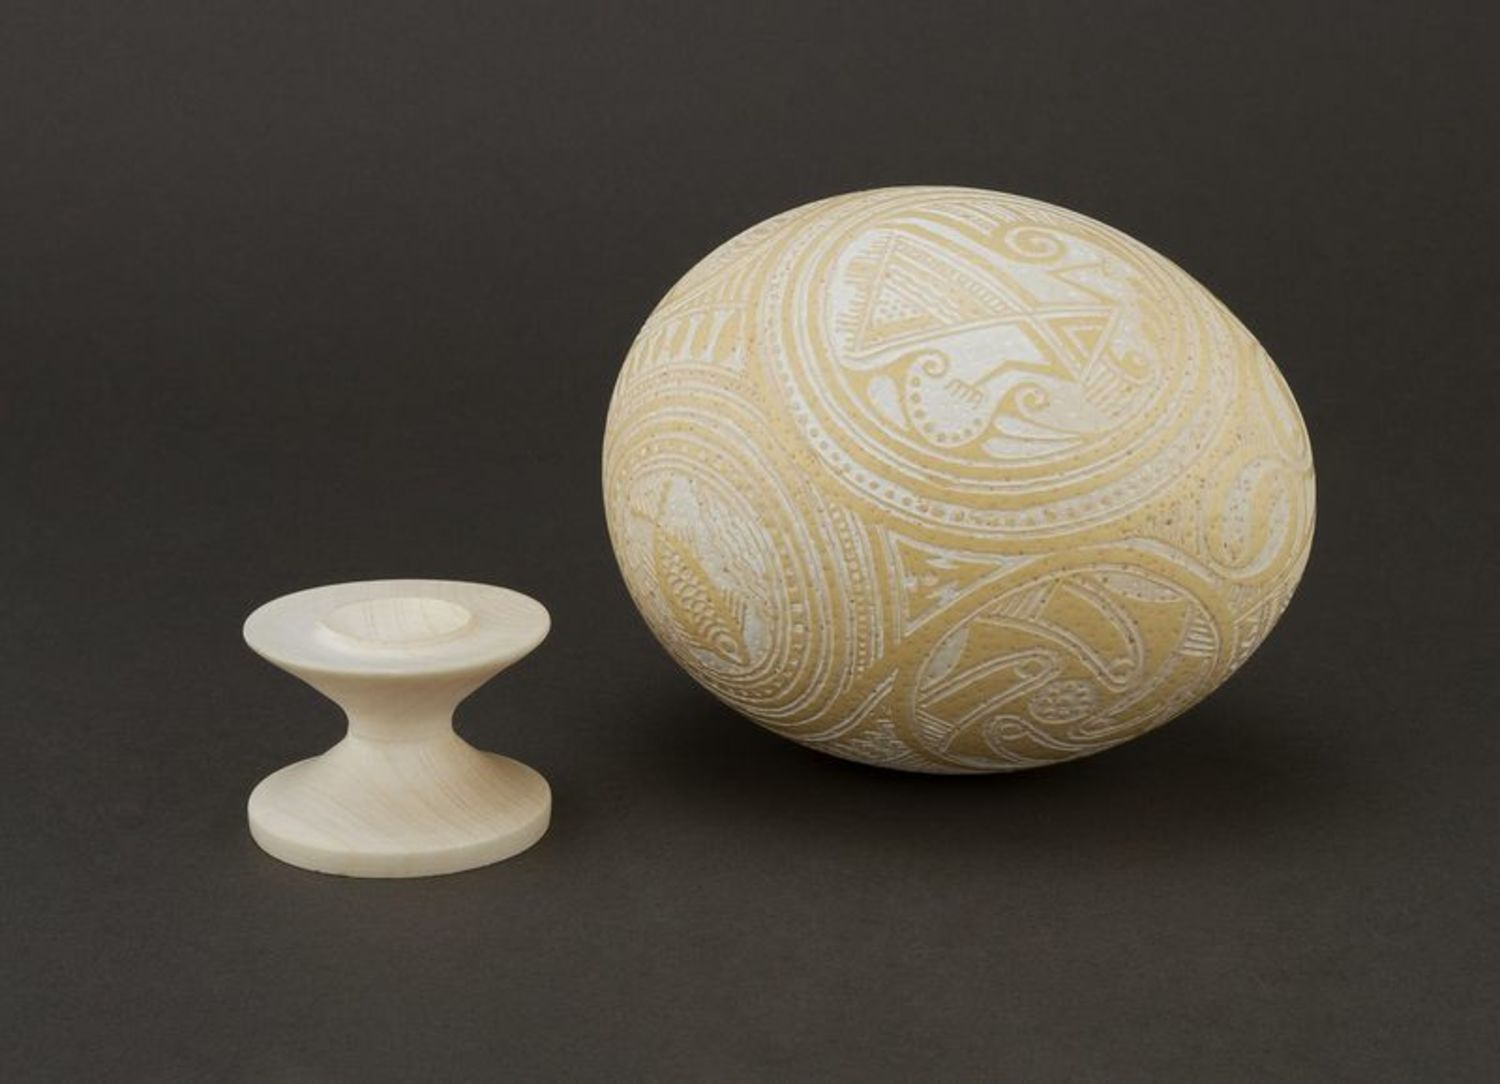 Decorative ostrich egg etched with vinegar photo 4